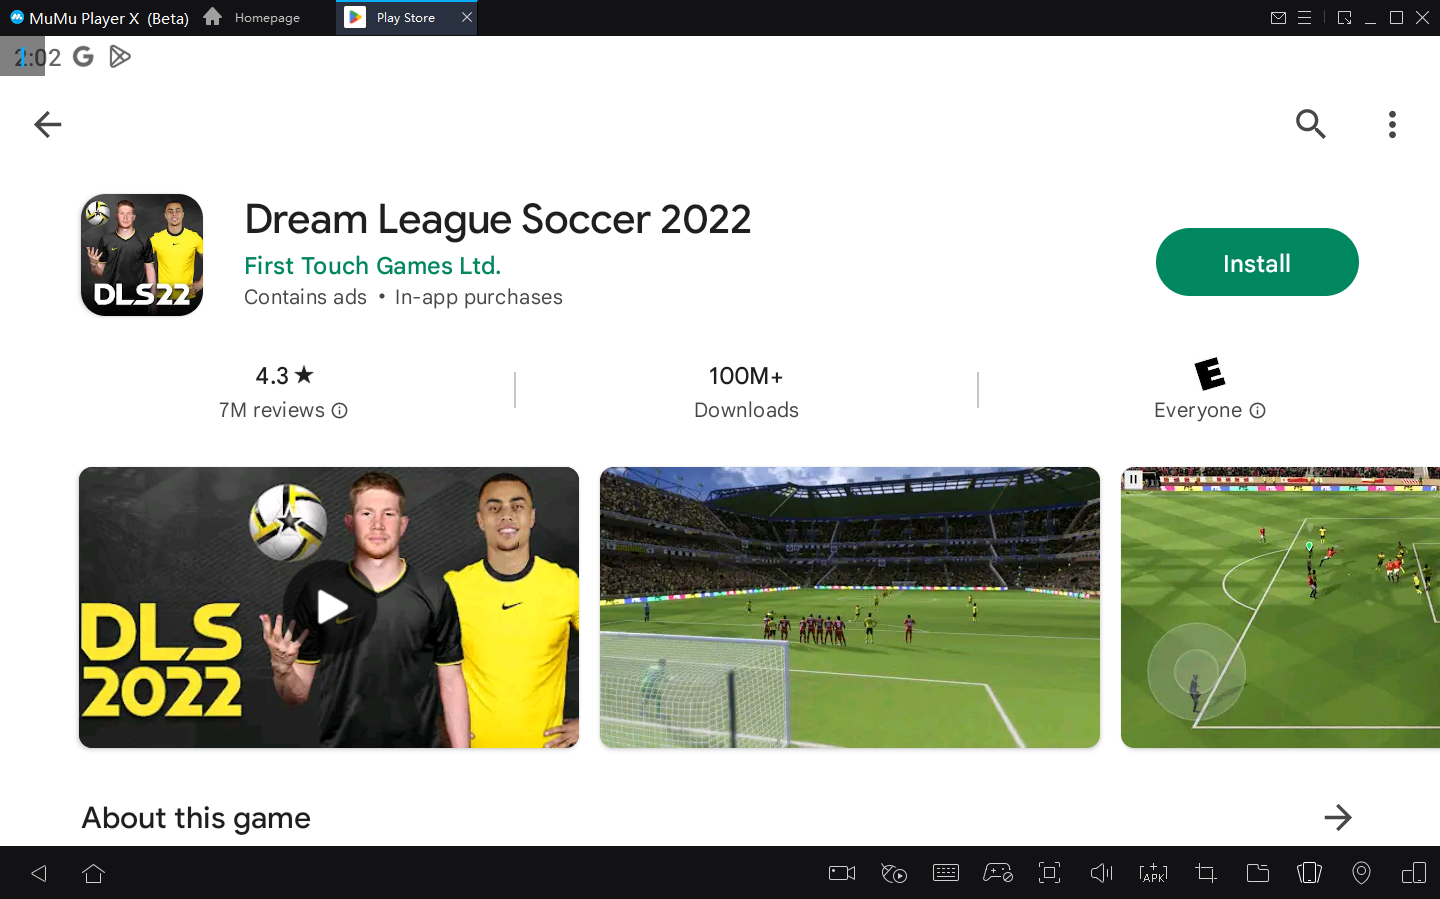 How to Play Dream League Soccer 2022 on PC with MuMu Player X